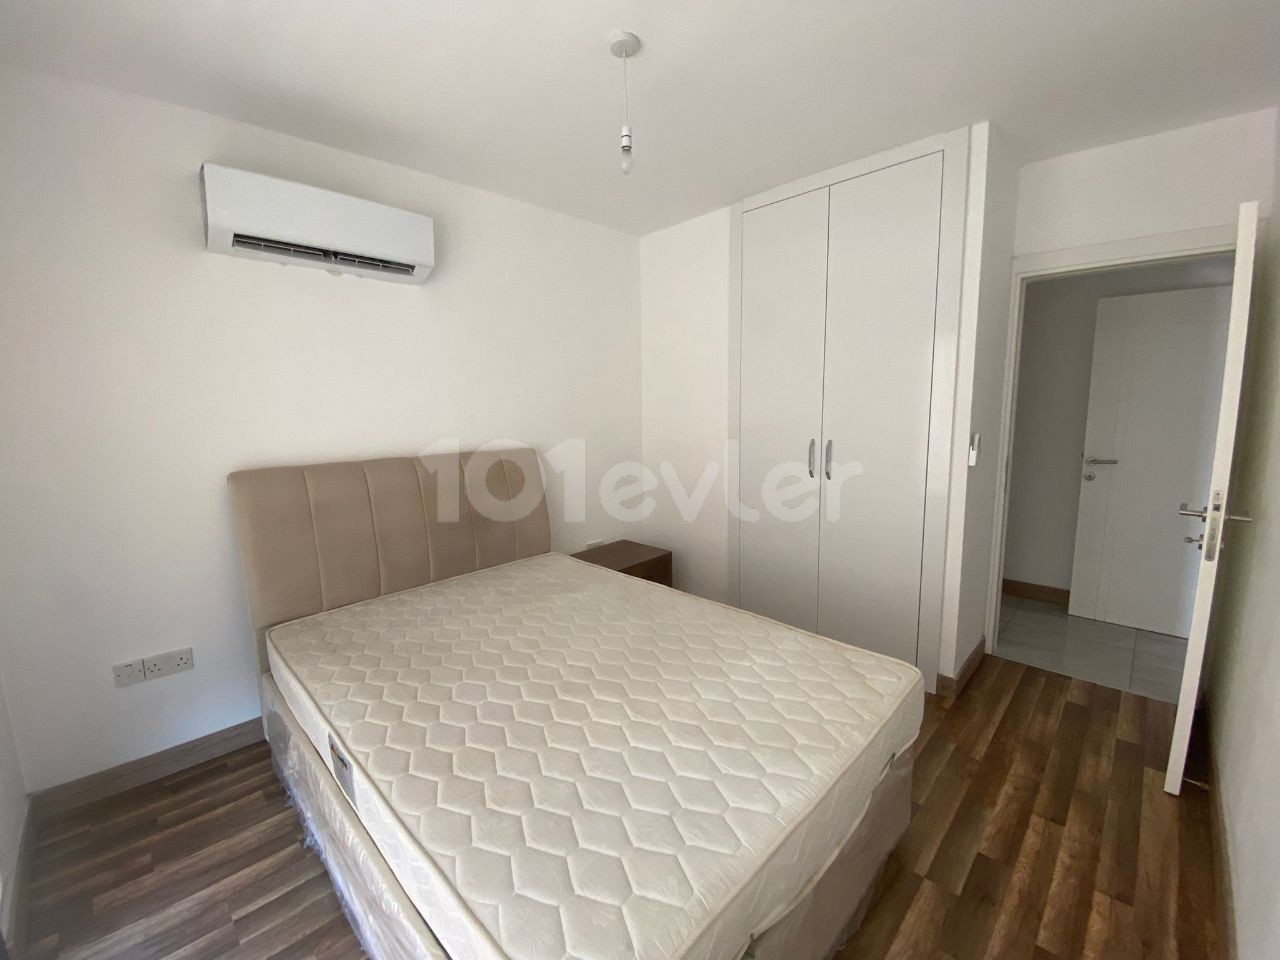 2 + 1 Elevator Apartment for Rent in Kyrenia Center of Cyprus ** 